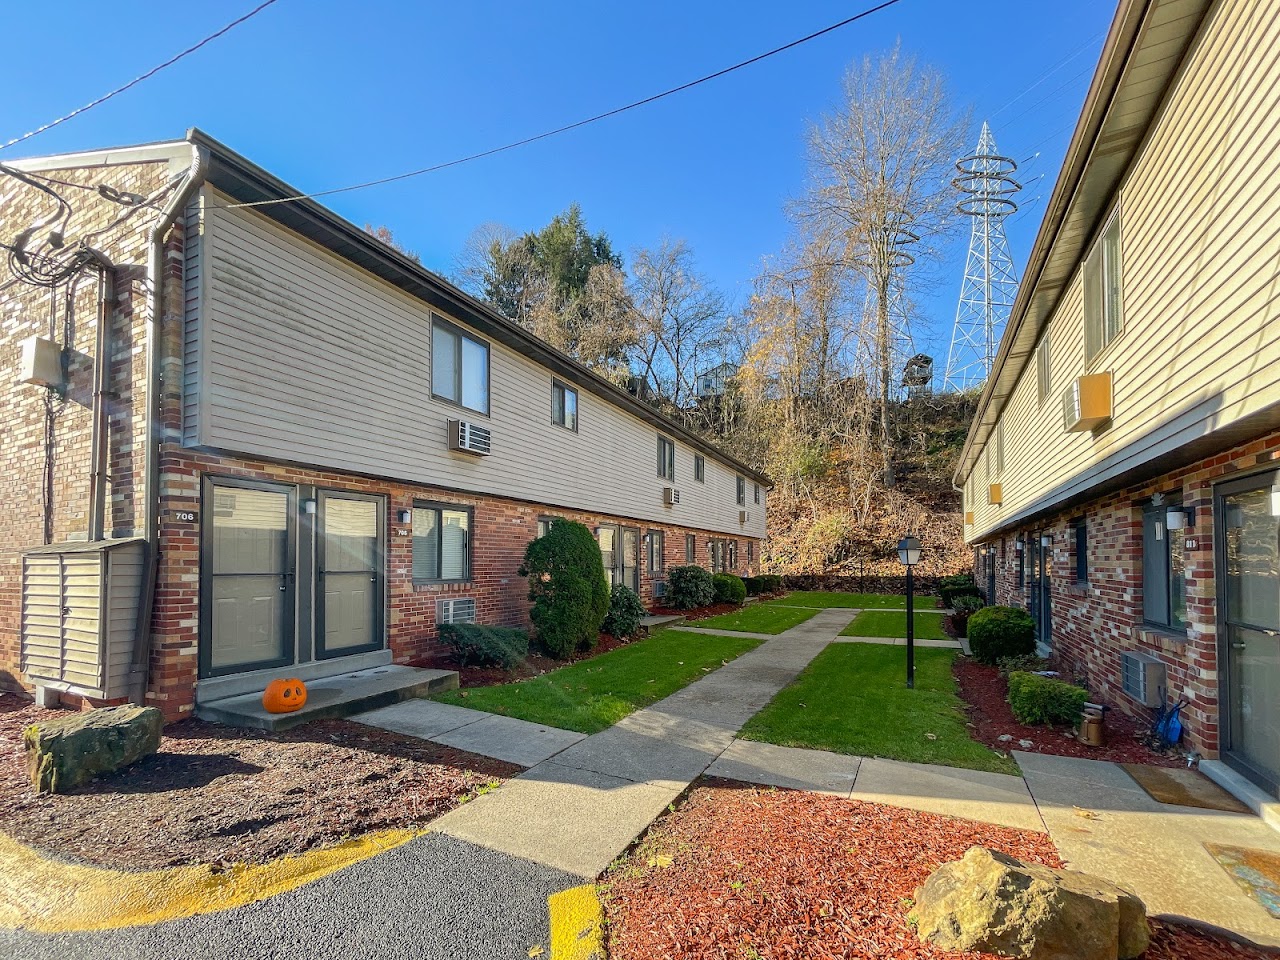 Photo of MEADOWS APTS at 201 STATION ST PENN HILLS, PA 15235